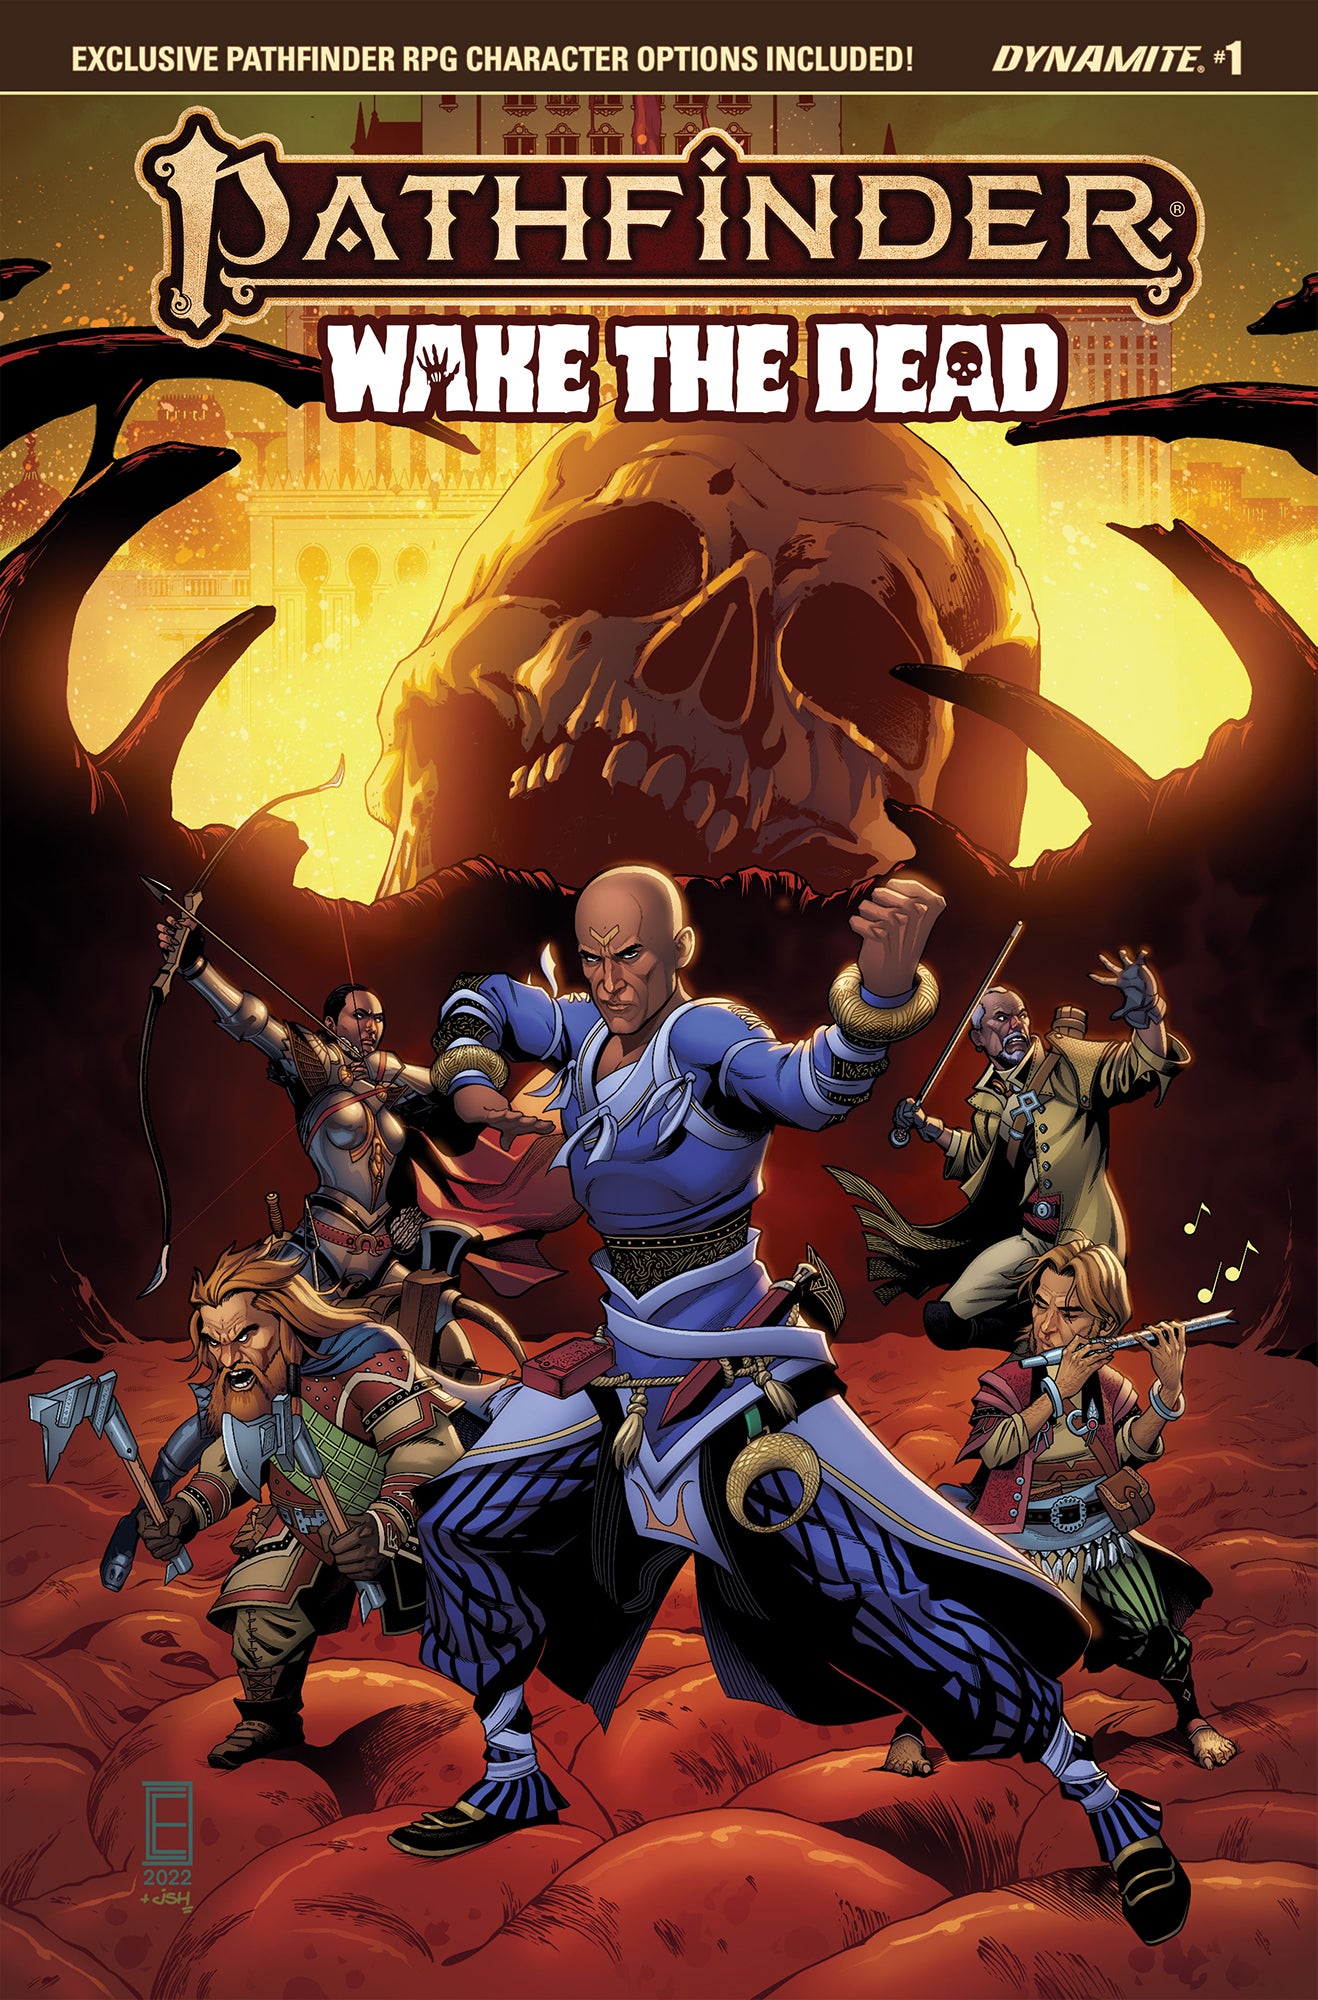 Pathfinder Wake The Dead by Dynamite Comics : Sajan the iconic Monk stands in front of the other Iconics in the foreground with a large skull looming in the background